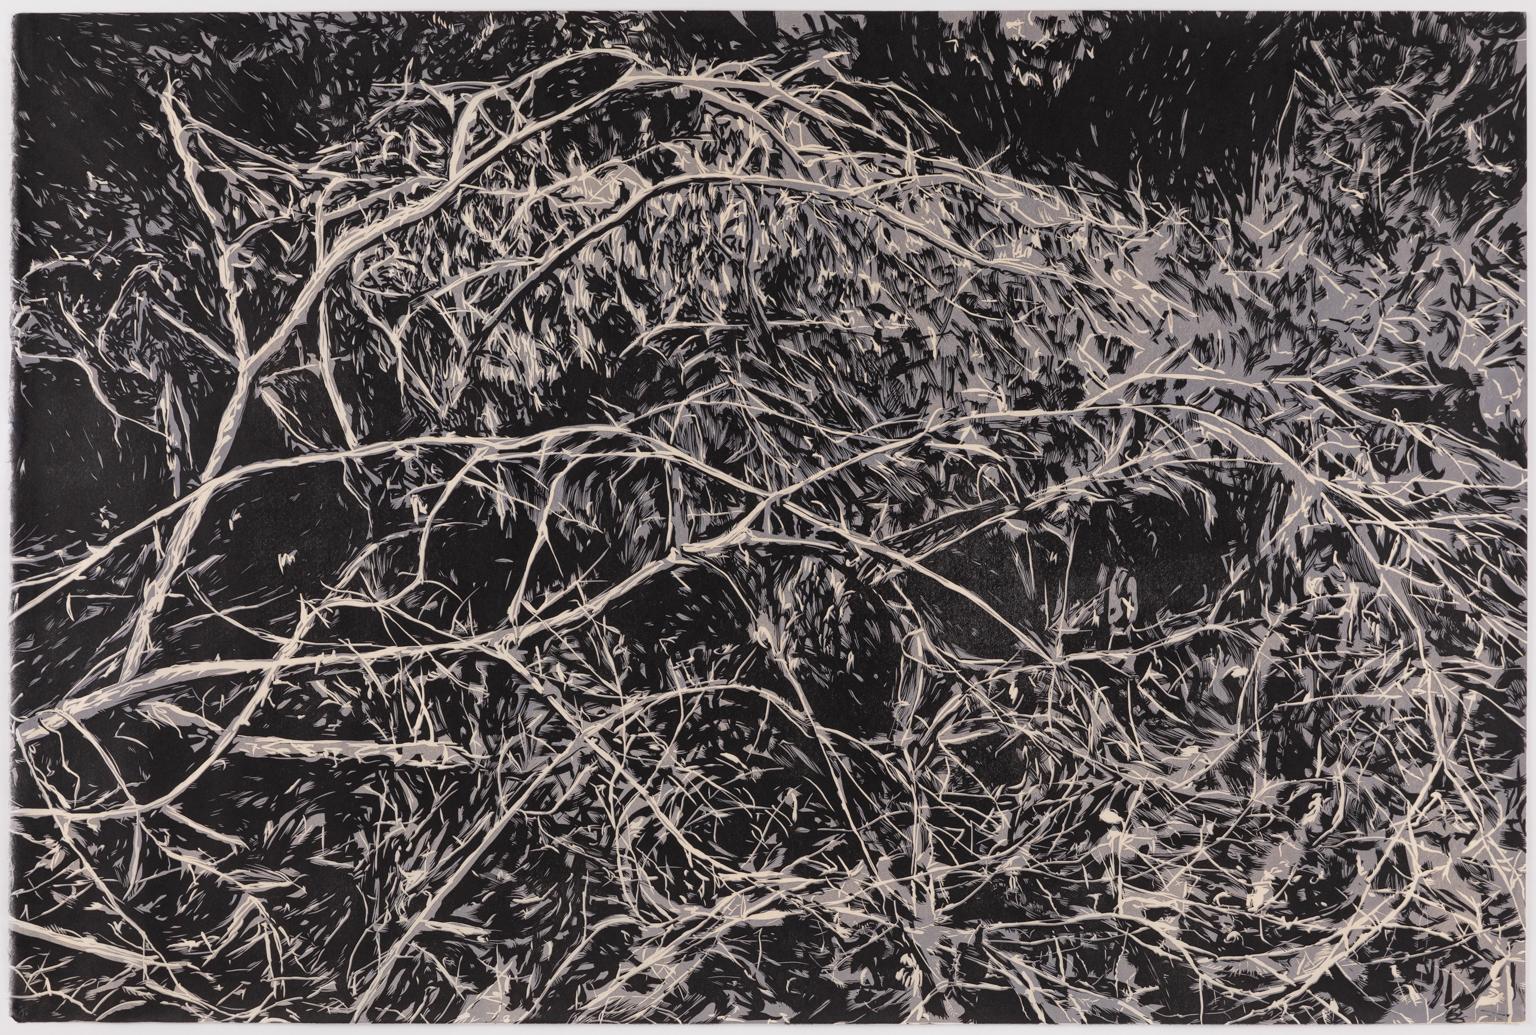 Hannah Skoonberg Landscape Print - Whirl - Large Print of Tangled Branches with Foliage in Black and Gray